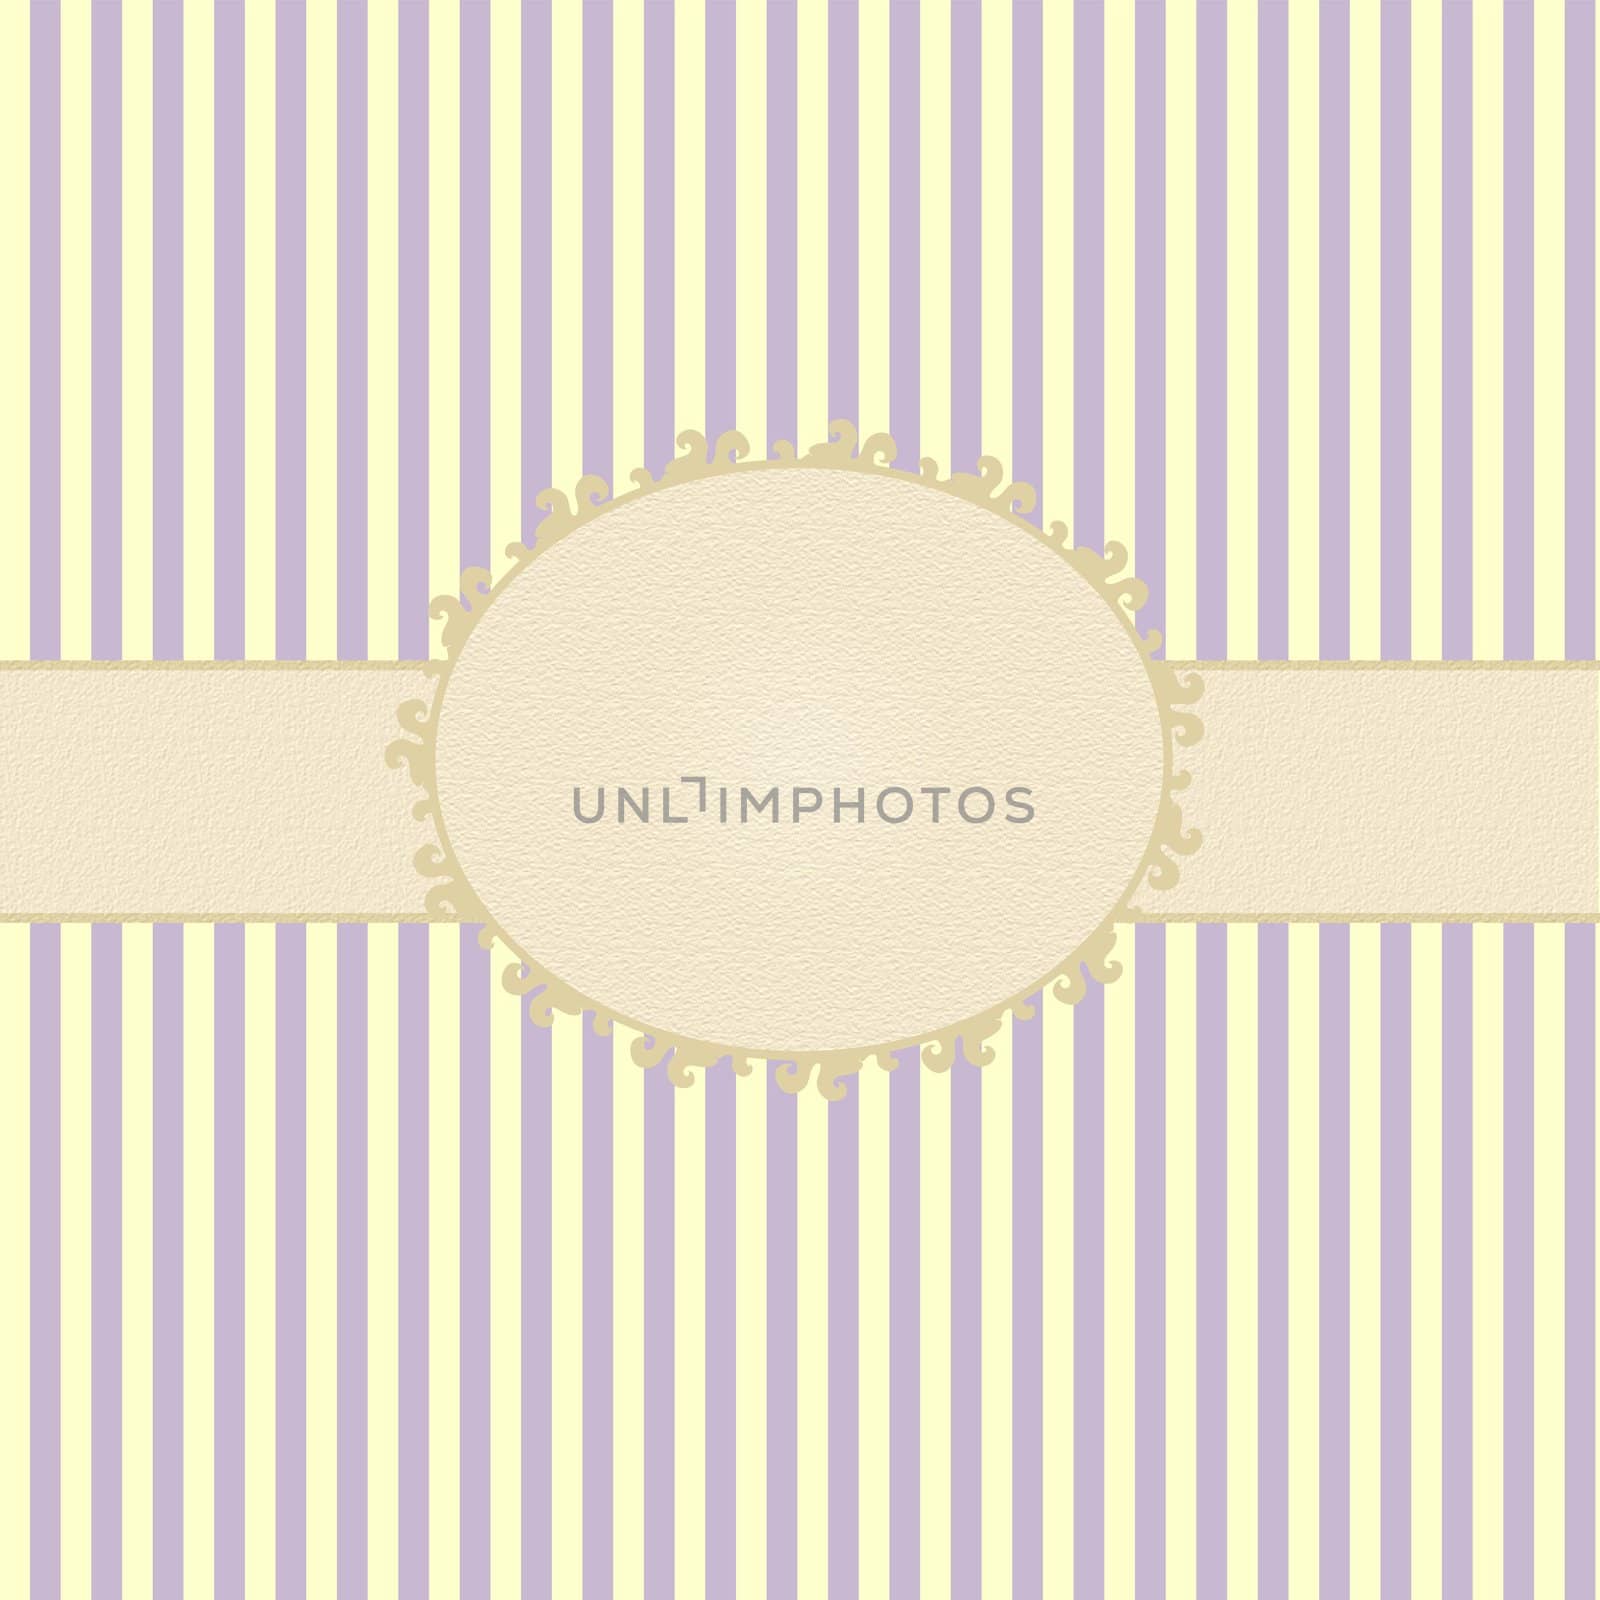 Colorful striped background with label and ribbon